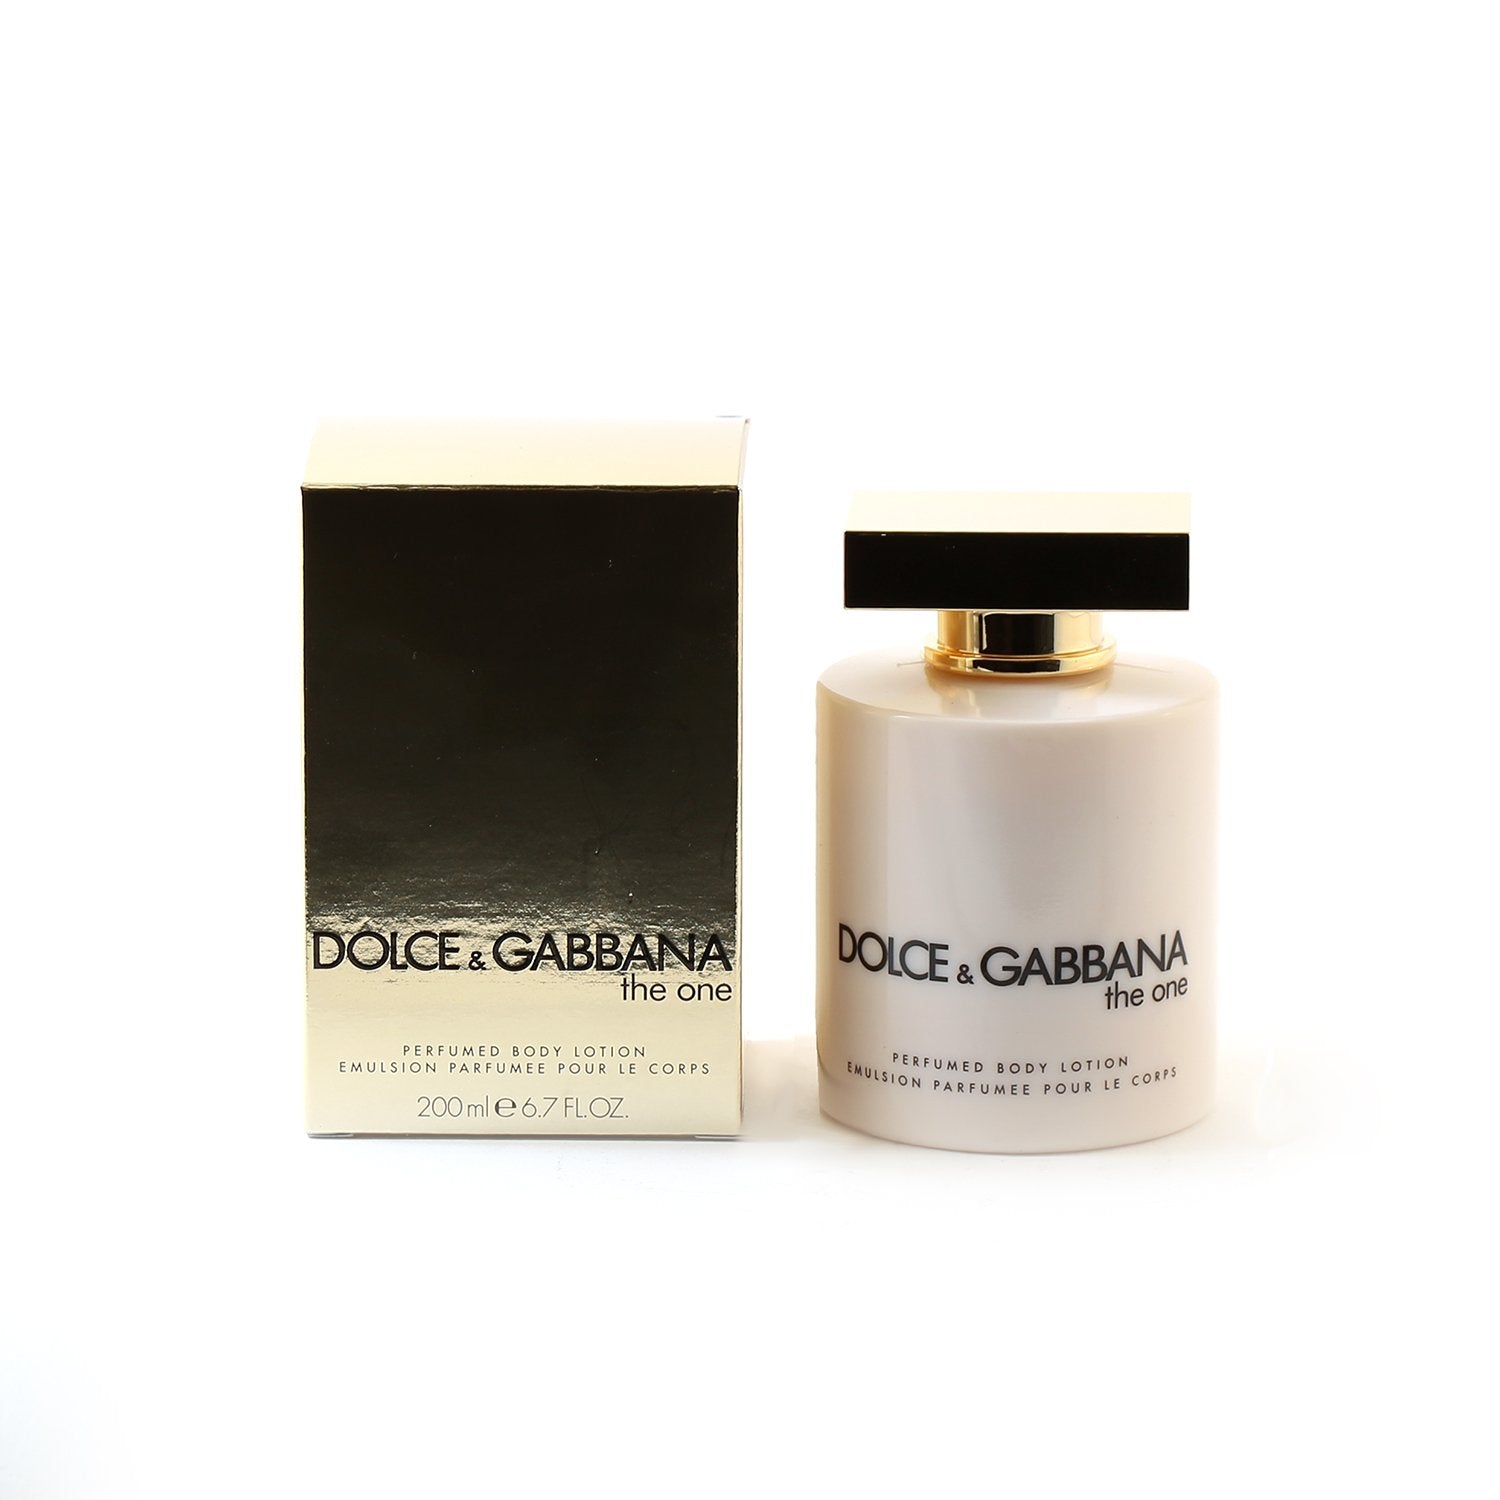 Perfume - DOLCE & GABBANA THE ONE FOR WOMEN - BODY LOTION, 6.7 Oz